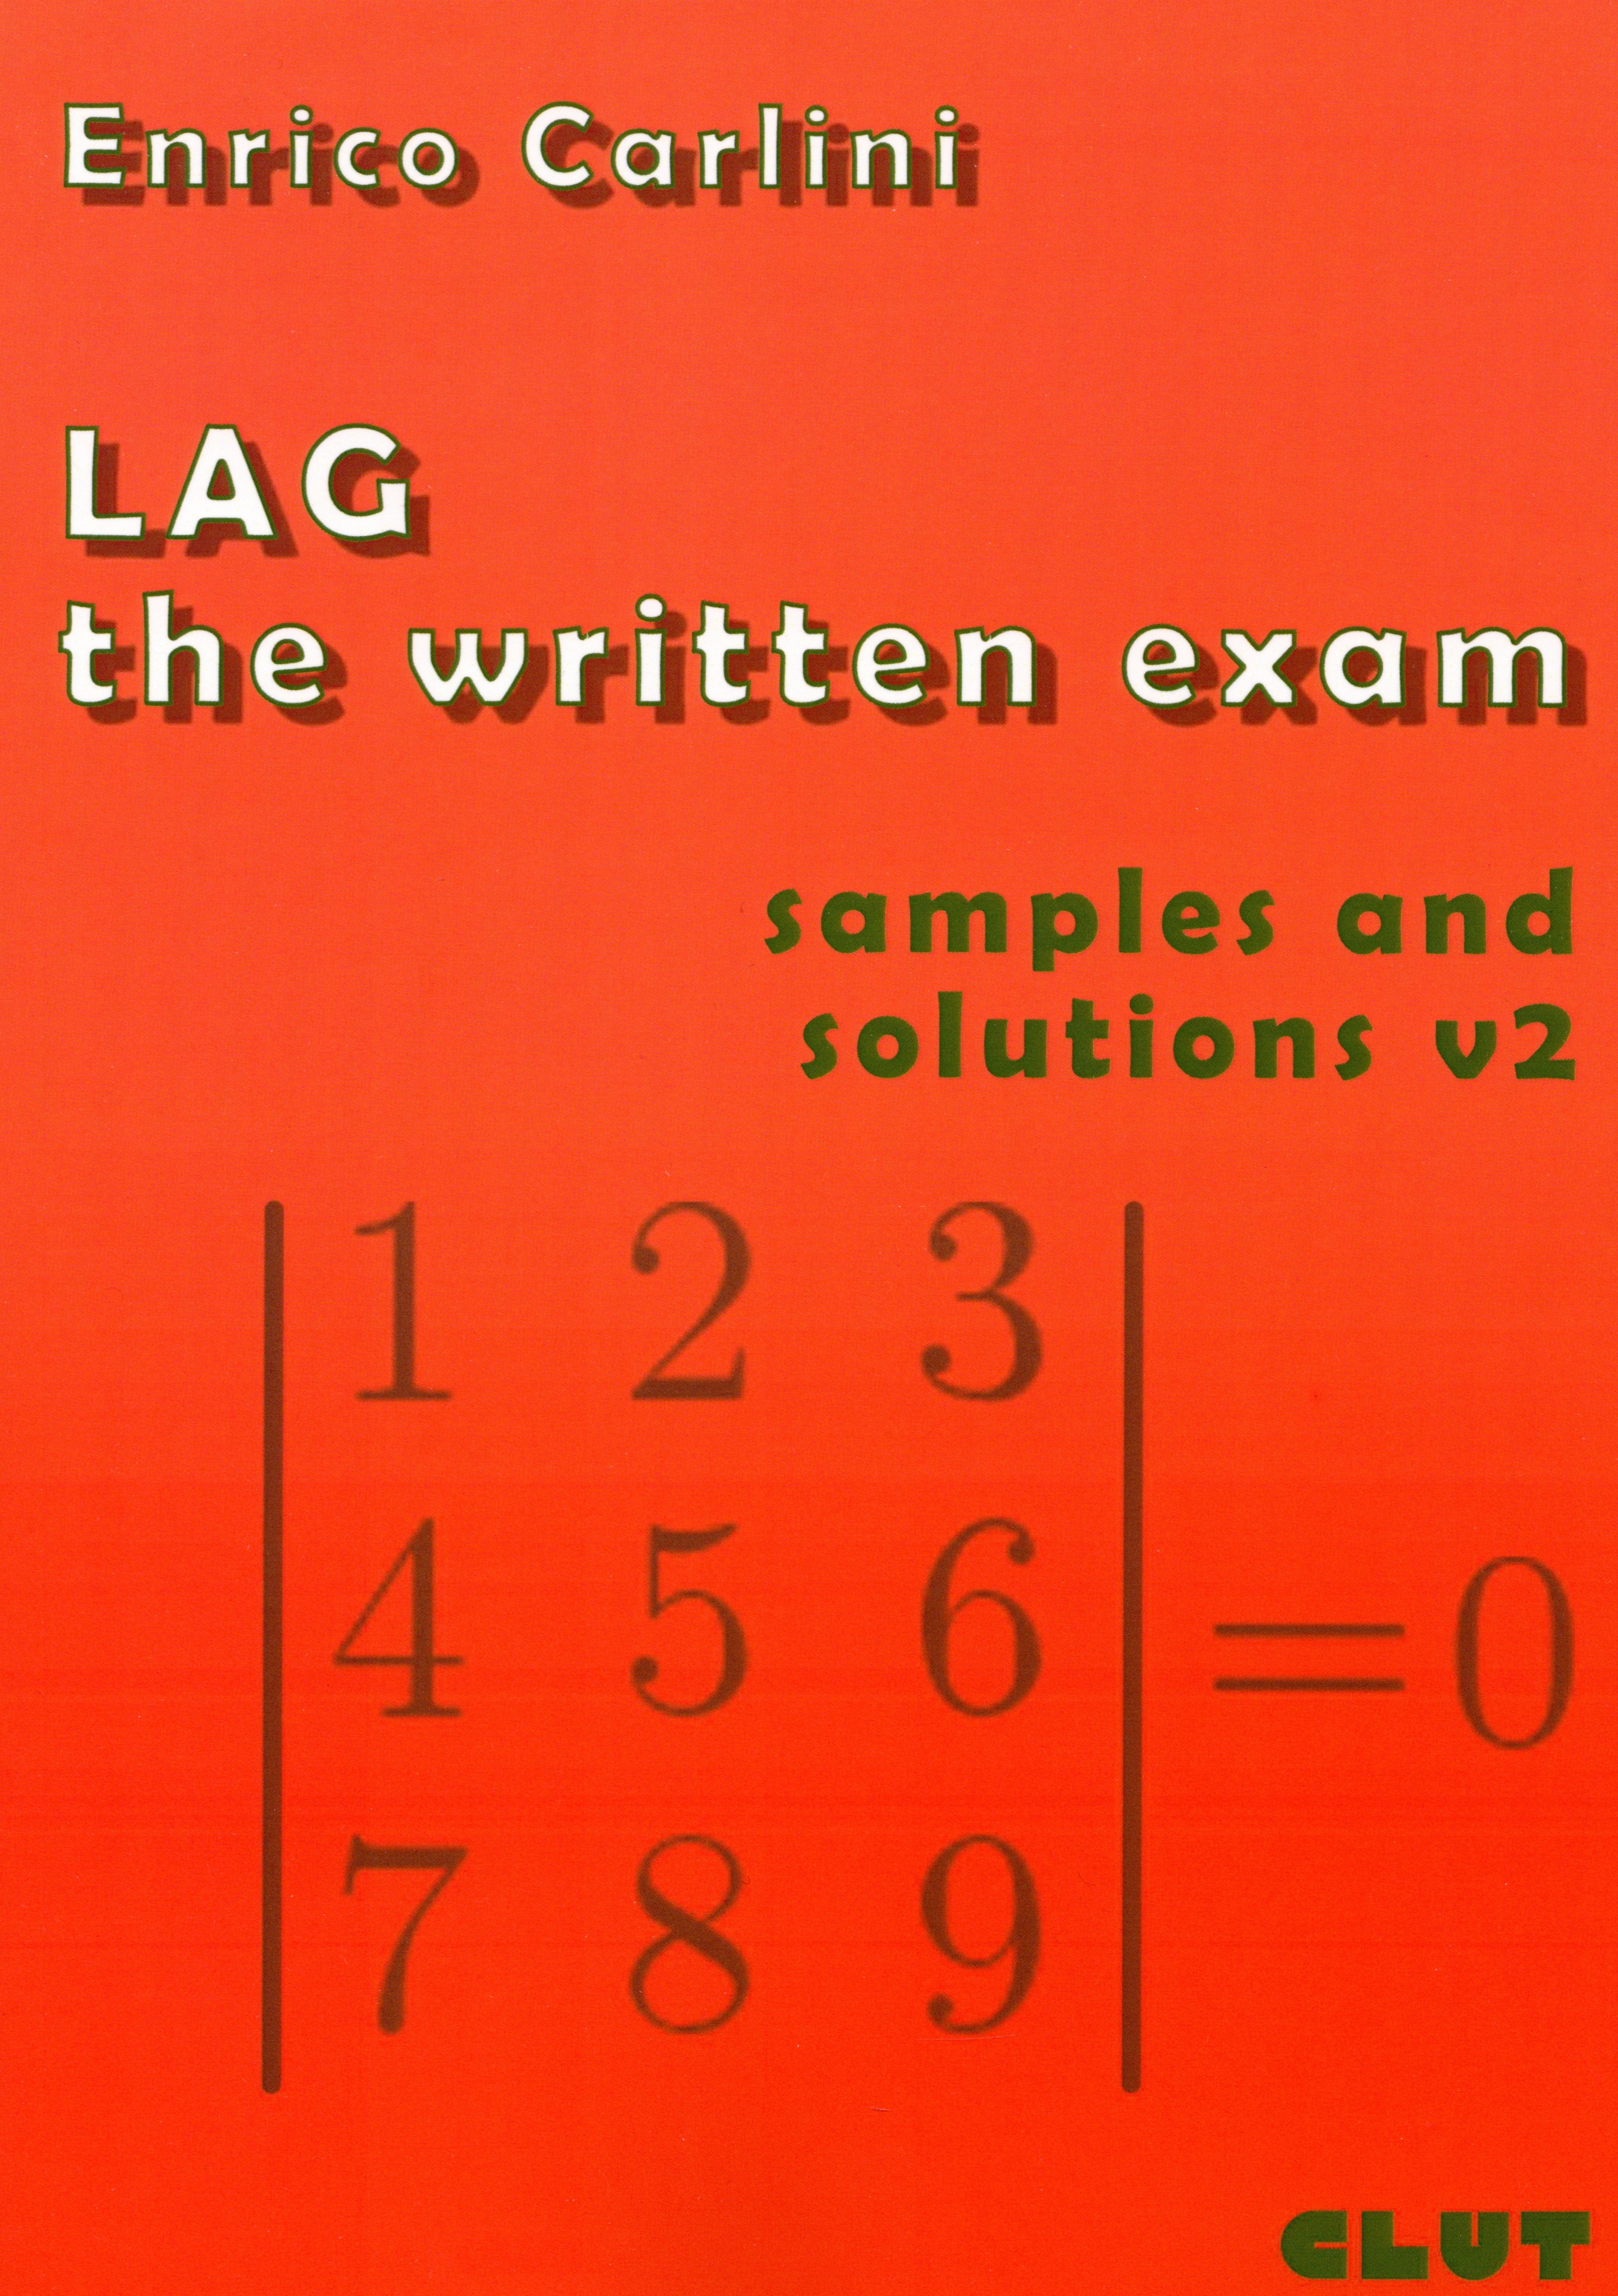 LAG the written exam - samples and solutions v2